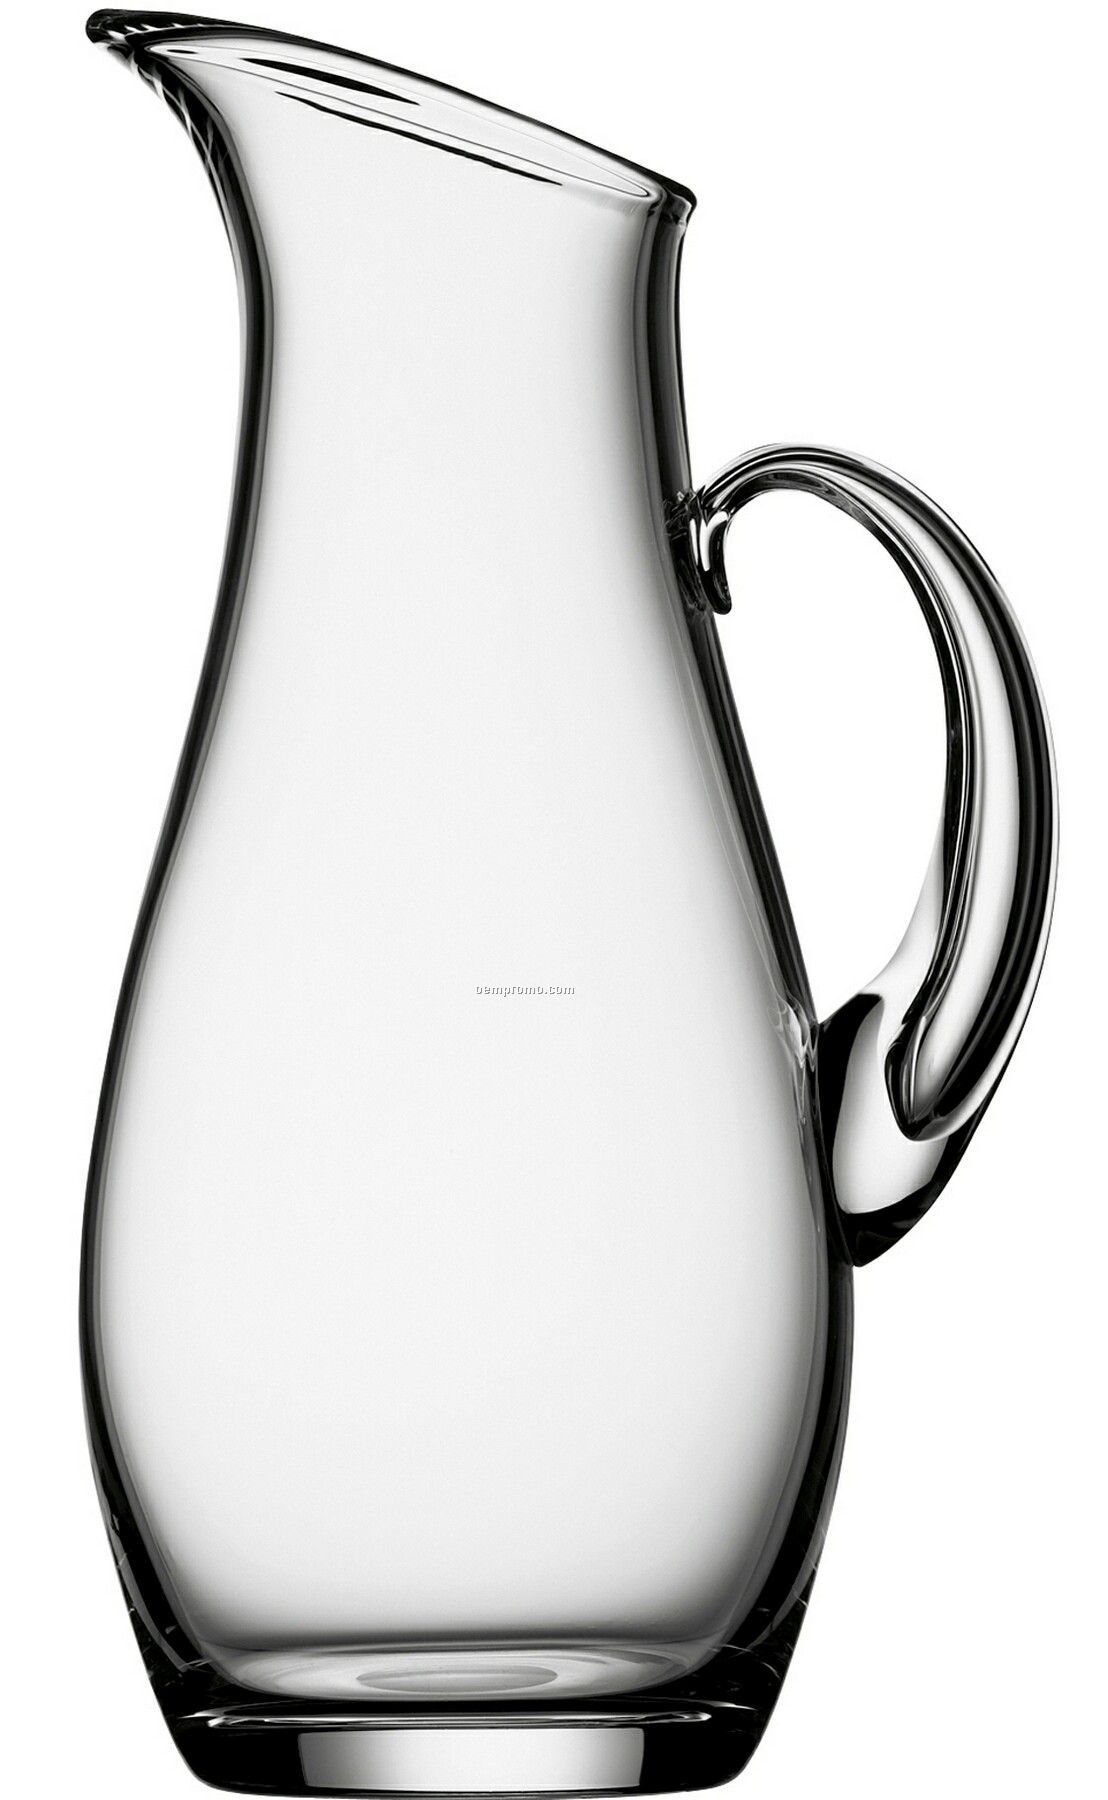 Difference Crystal Jug By Erika Lagerbielke